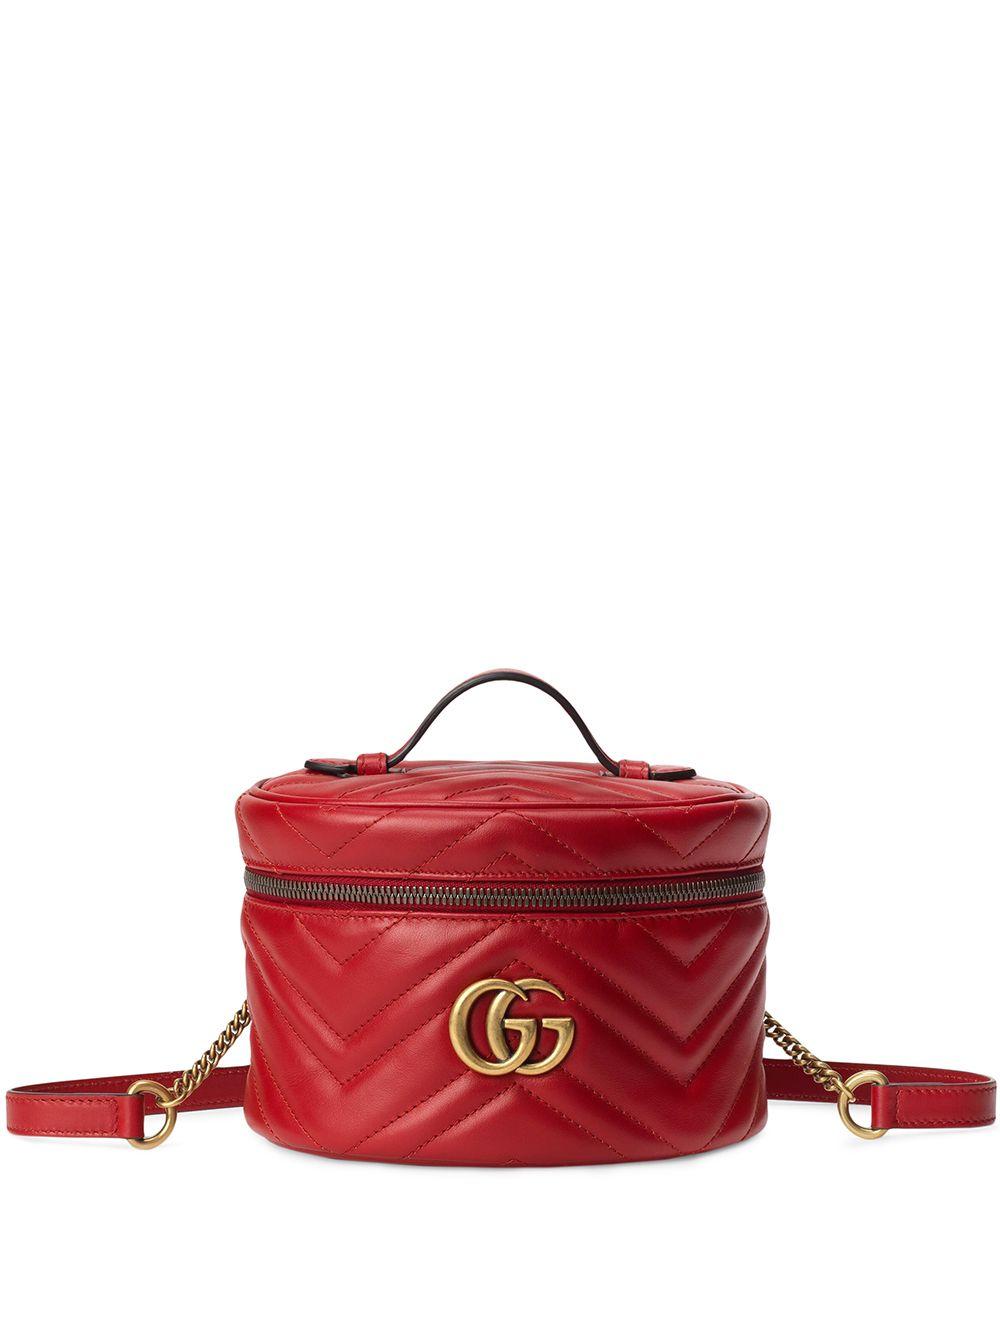 Gucci Leather GG Marmont Mini Backpack in Red | Lyst